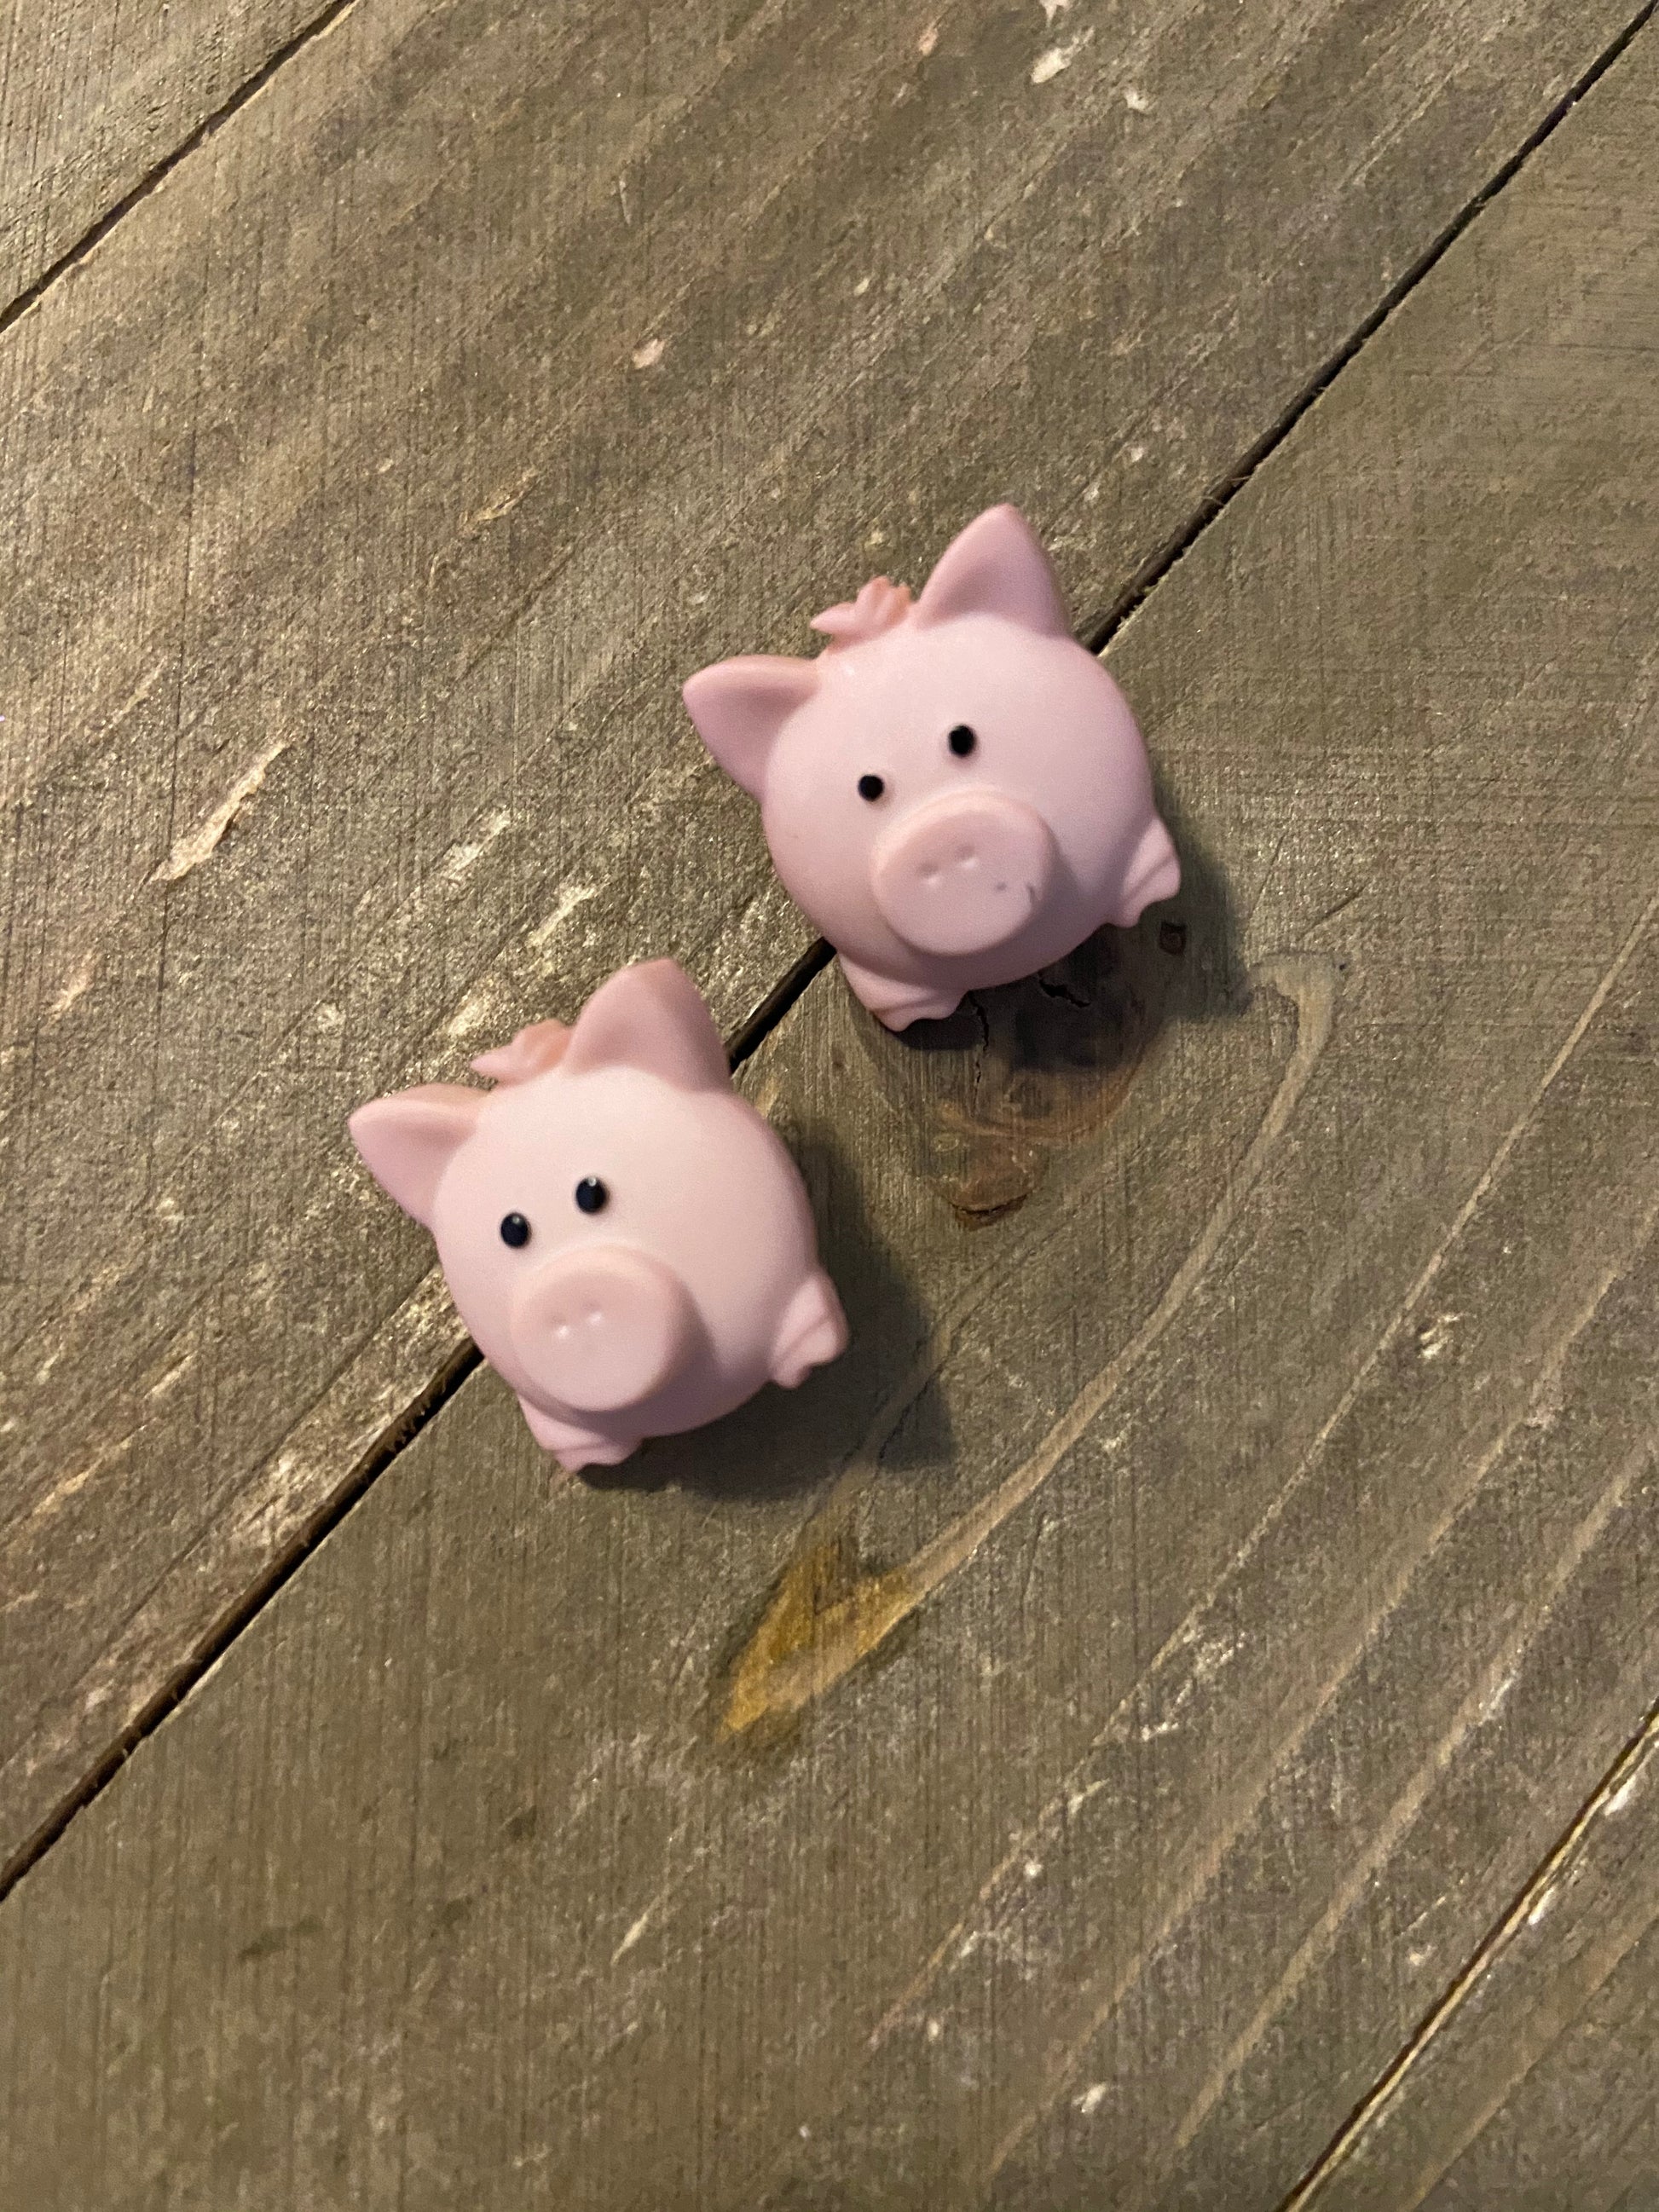 Pig Pen post earrings Earrings (2 different poses to choose)Pink tiful of LOVE